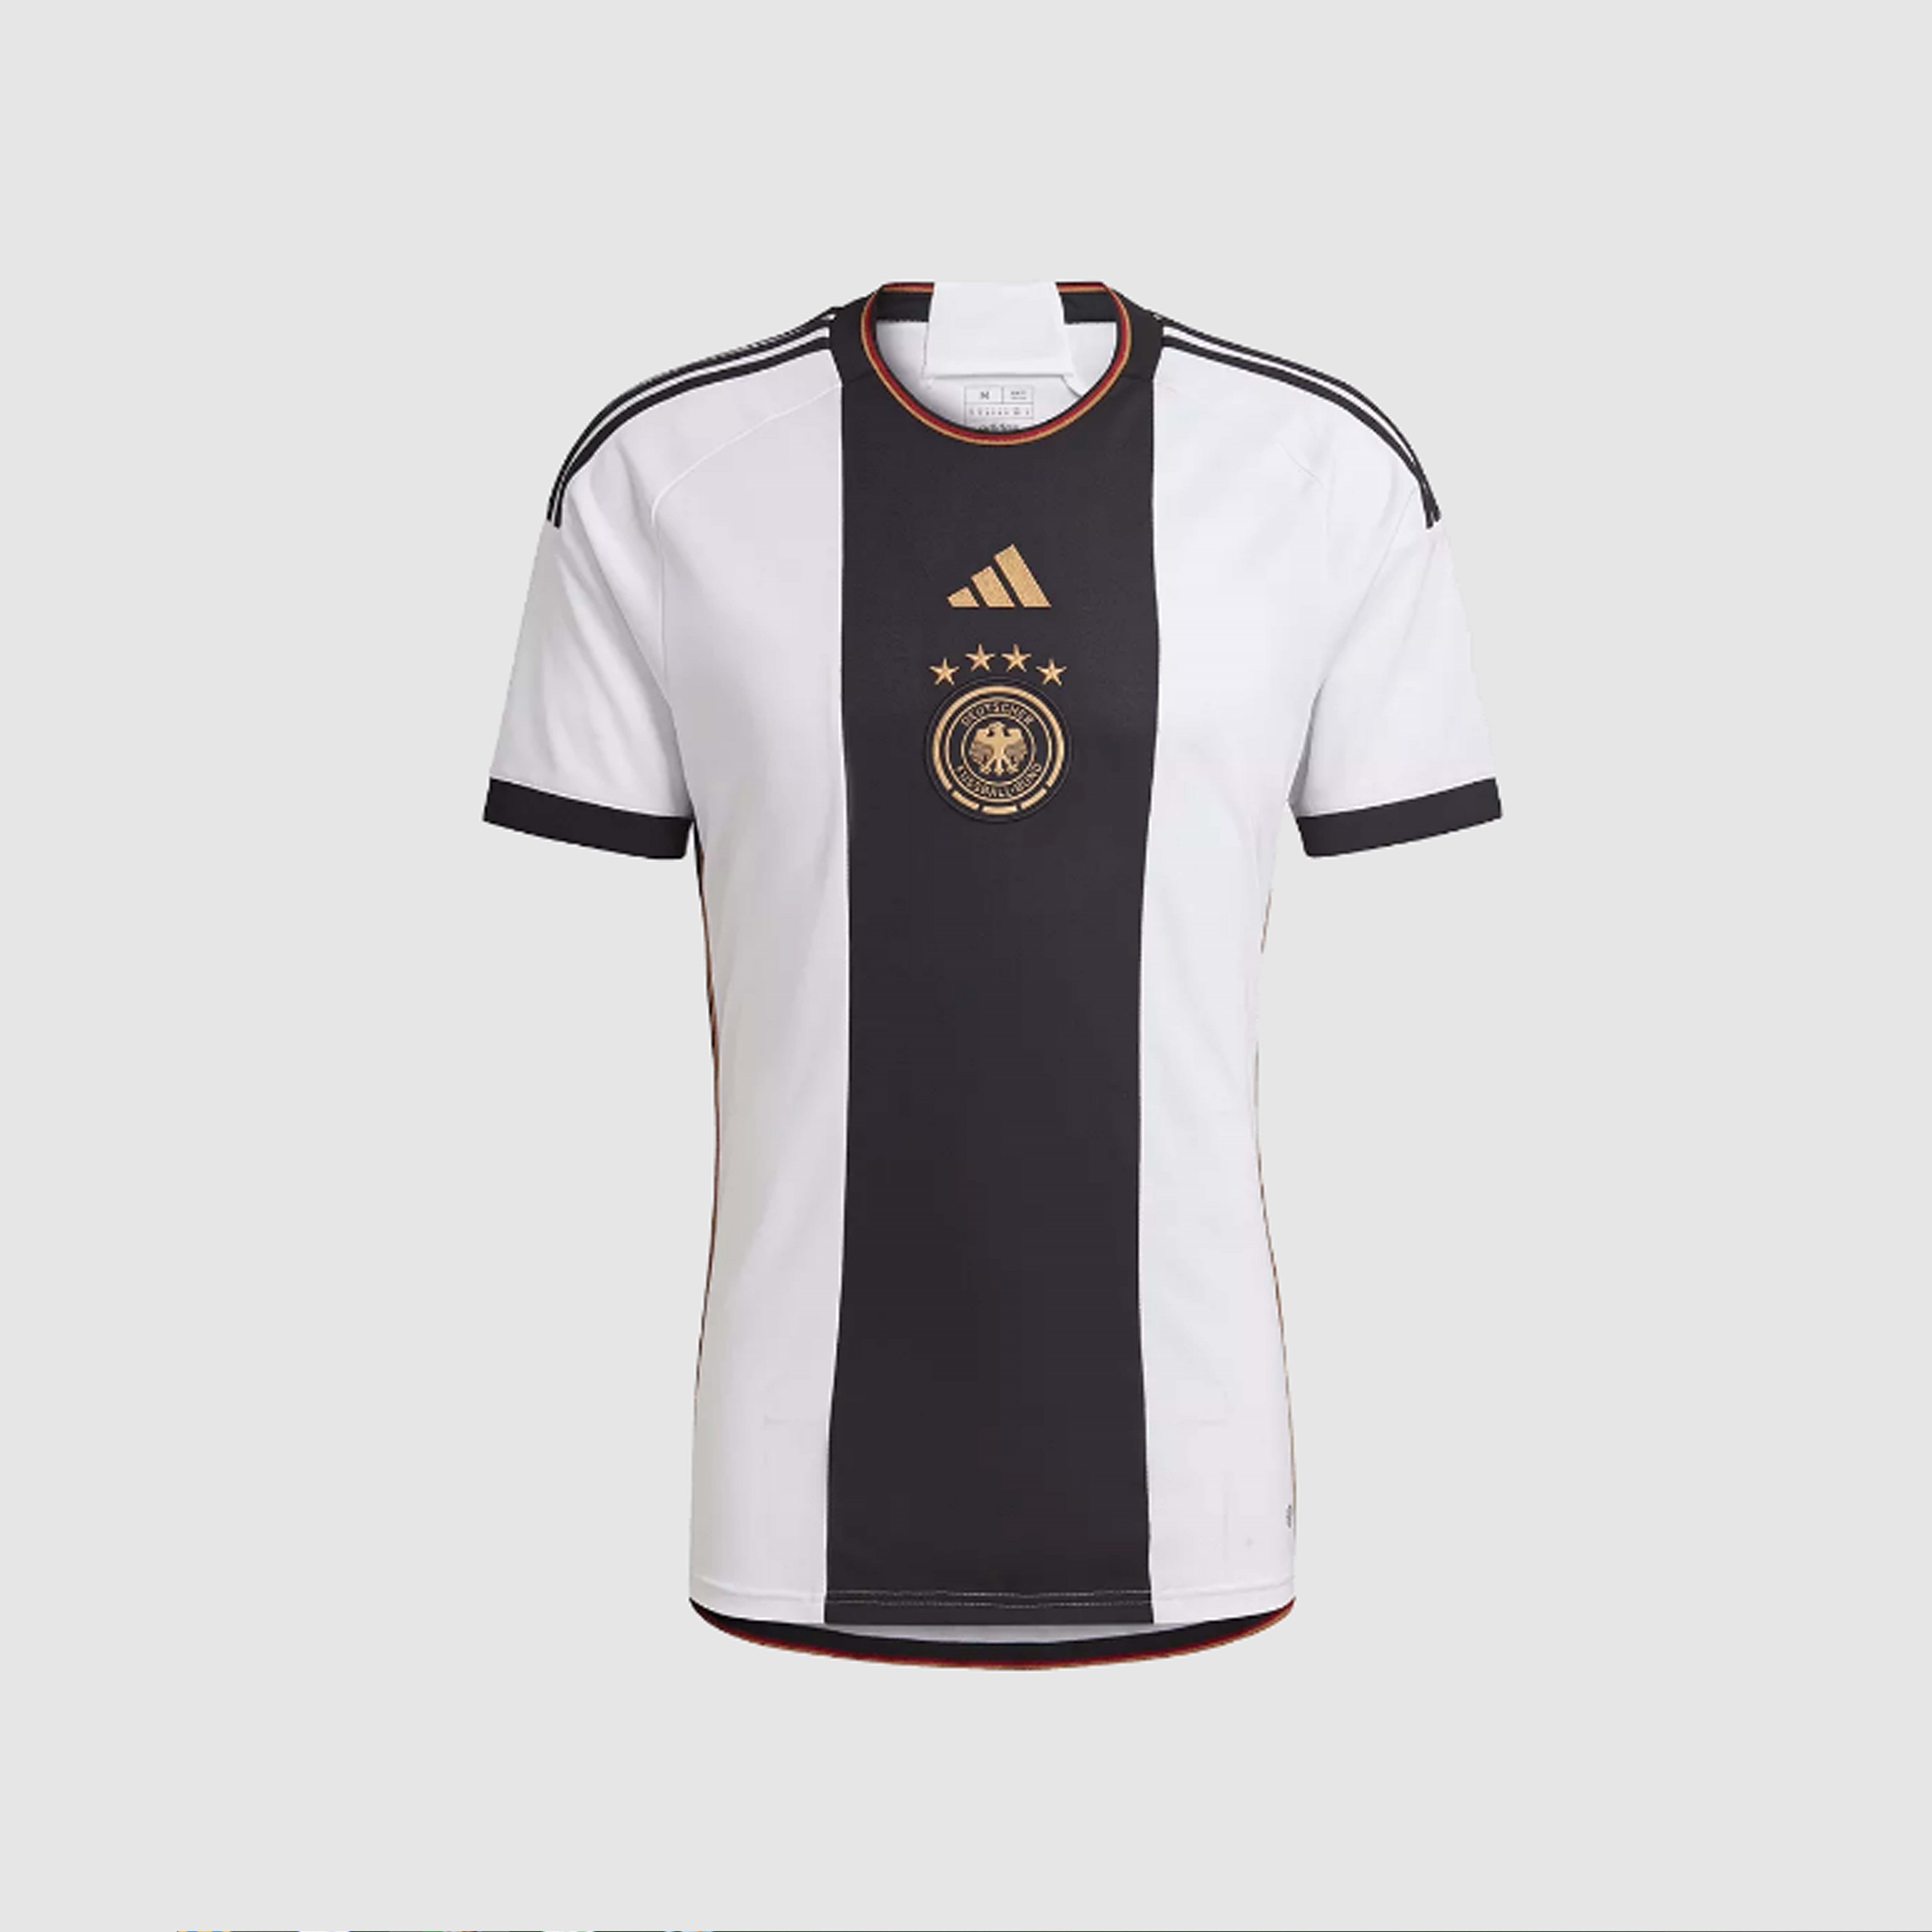 World Cup Jersey - Germany Home Jersey